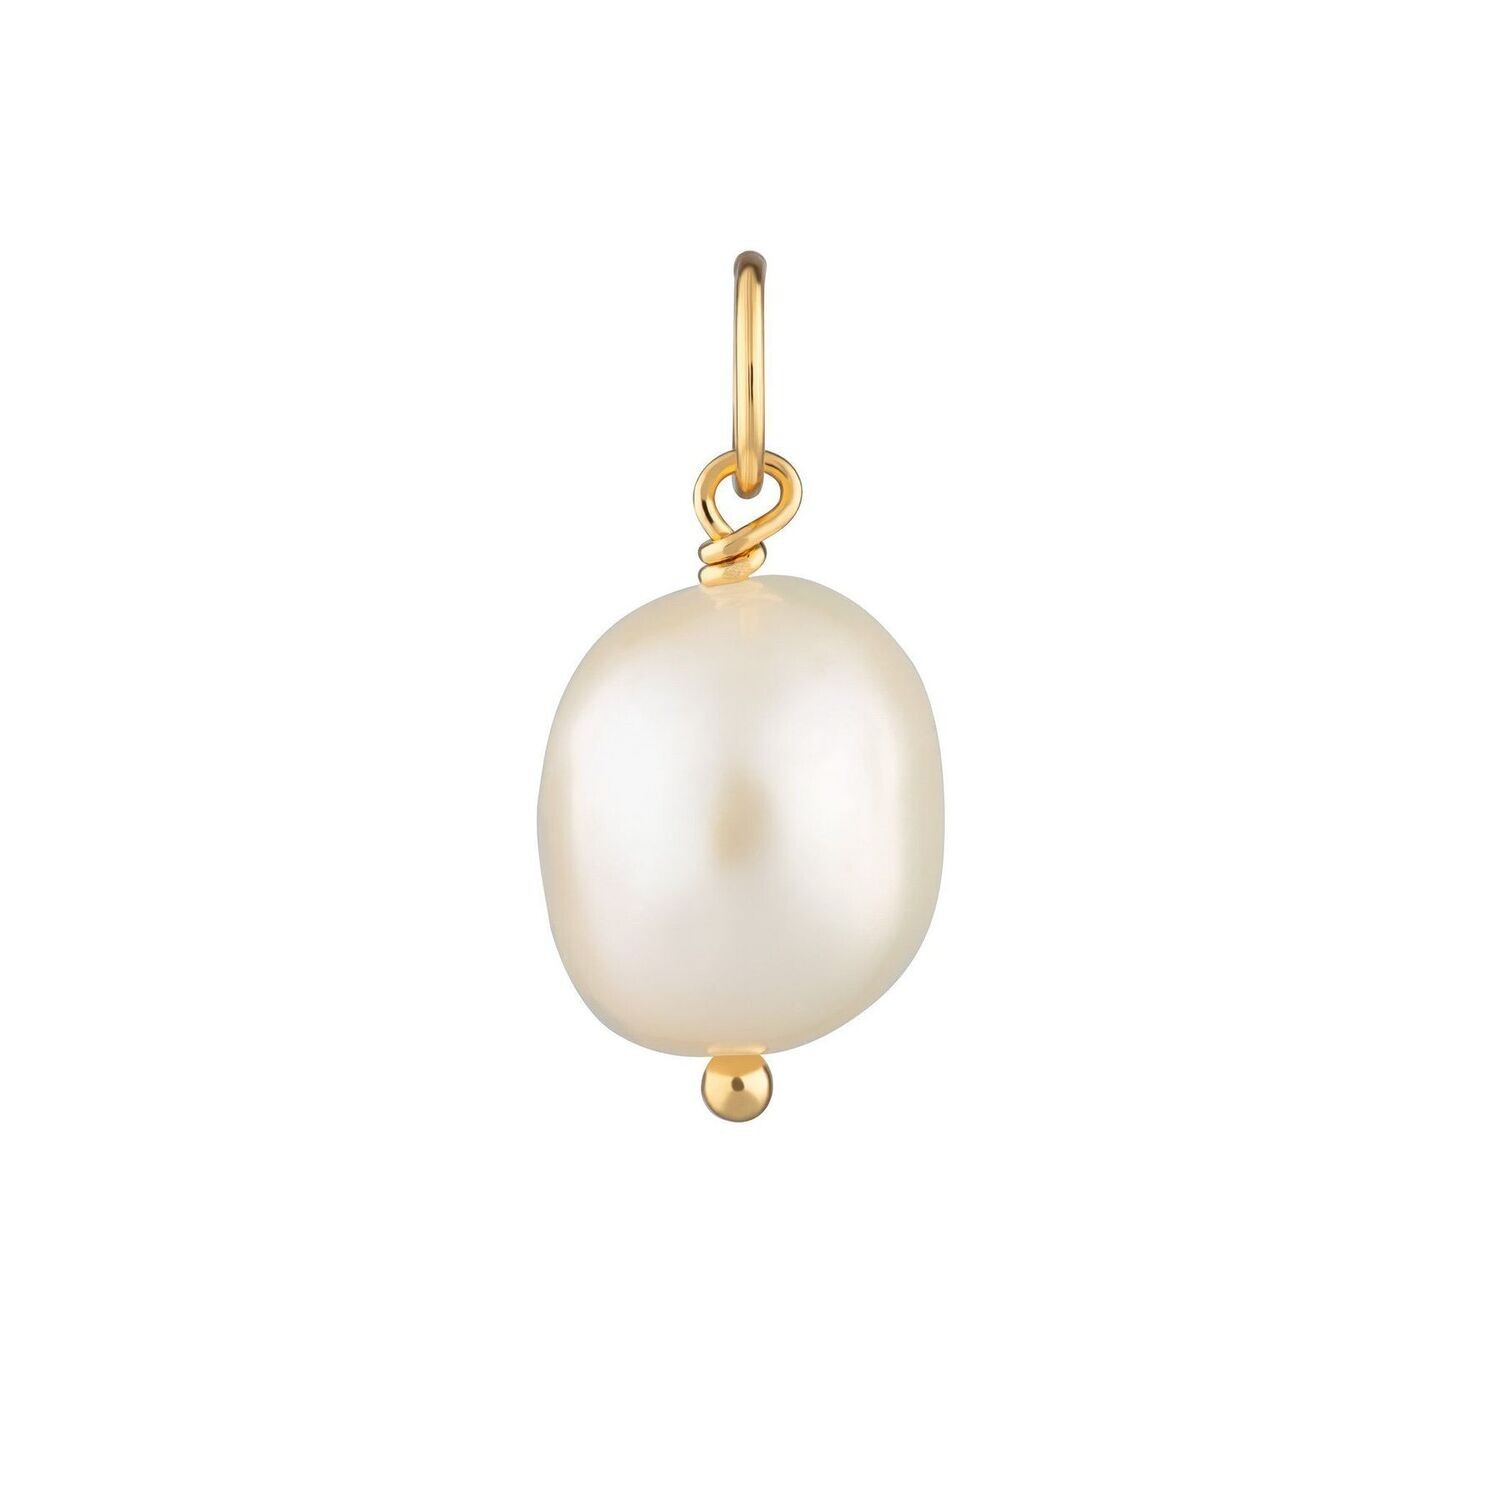 Silver or gold plated pearl pendant